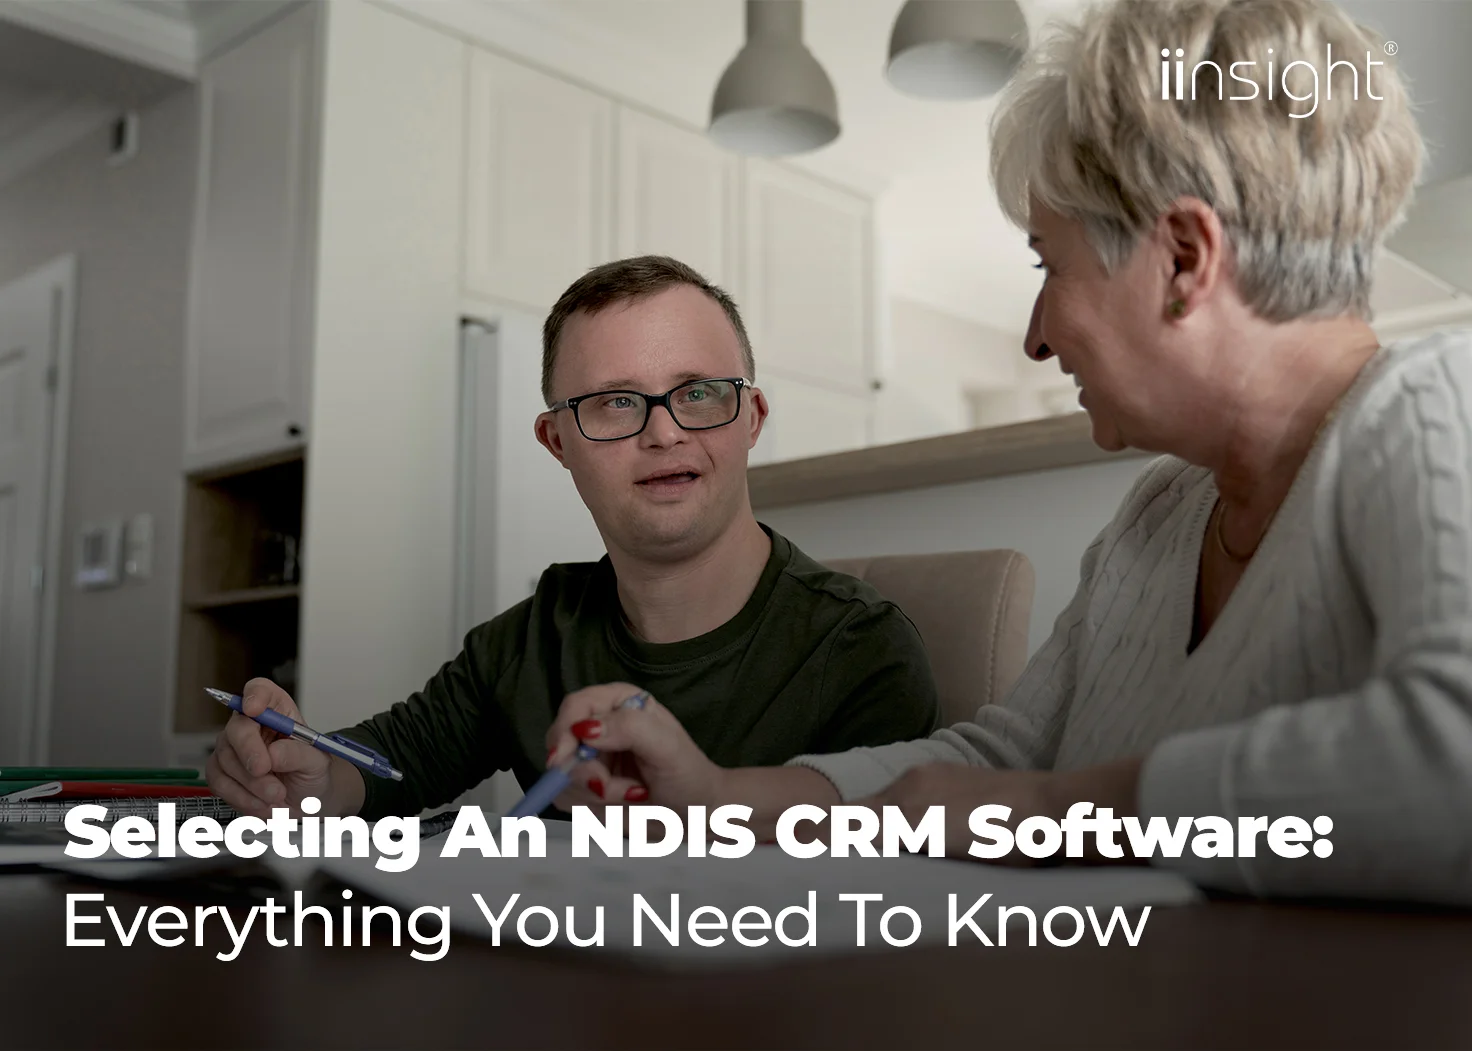 Selecting an NDIS CRM Software: Everything You Need to Know